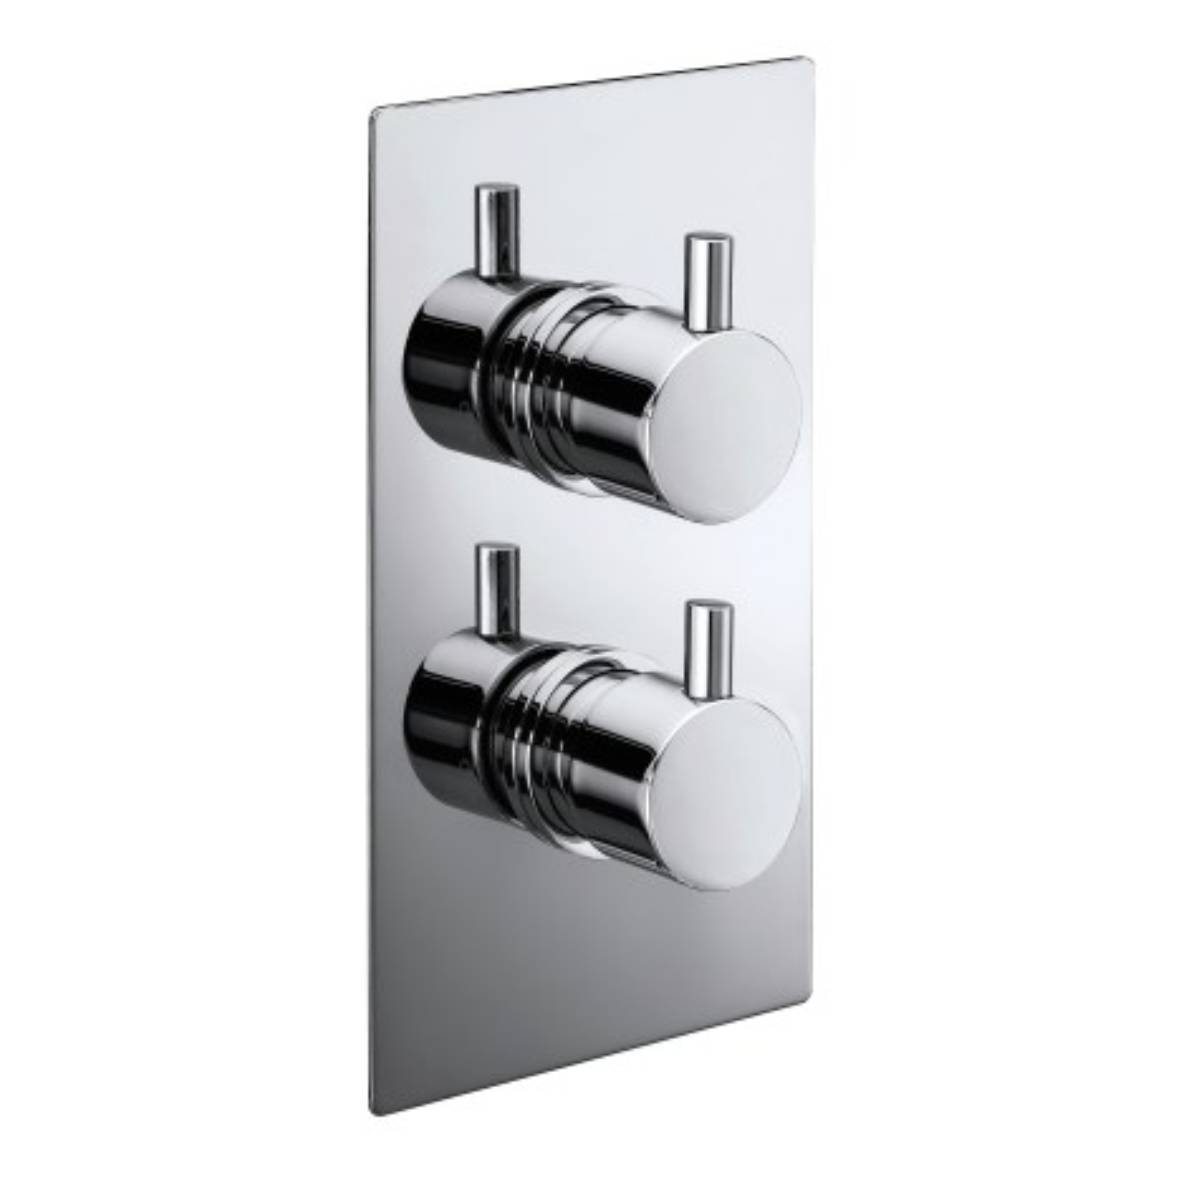 Twin Thermostatic Round Handle Concealed Valve with Diverter (6537)